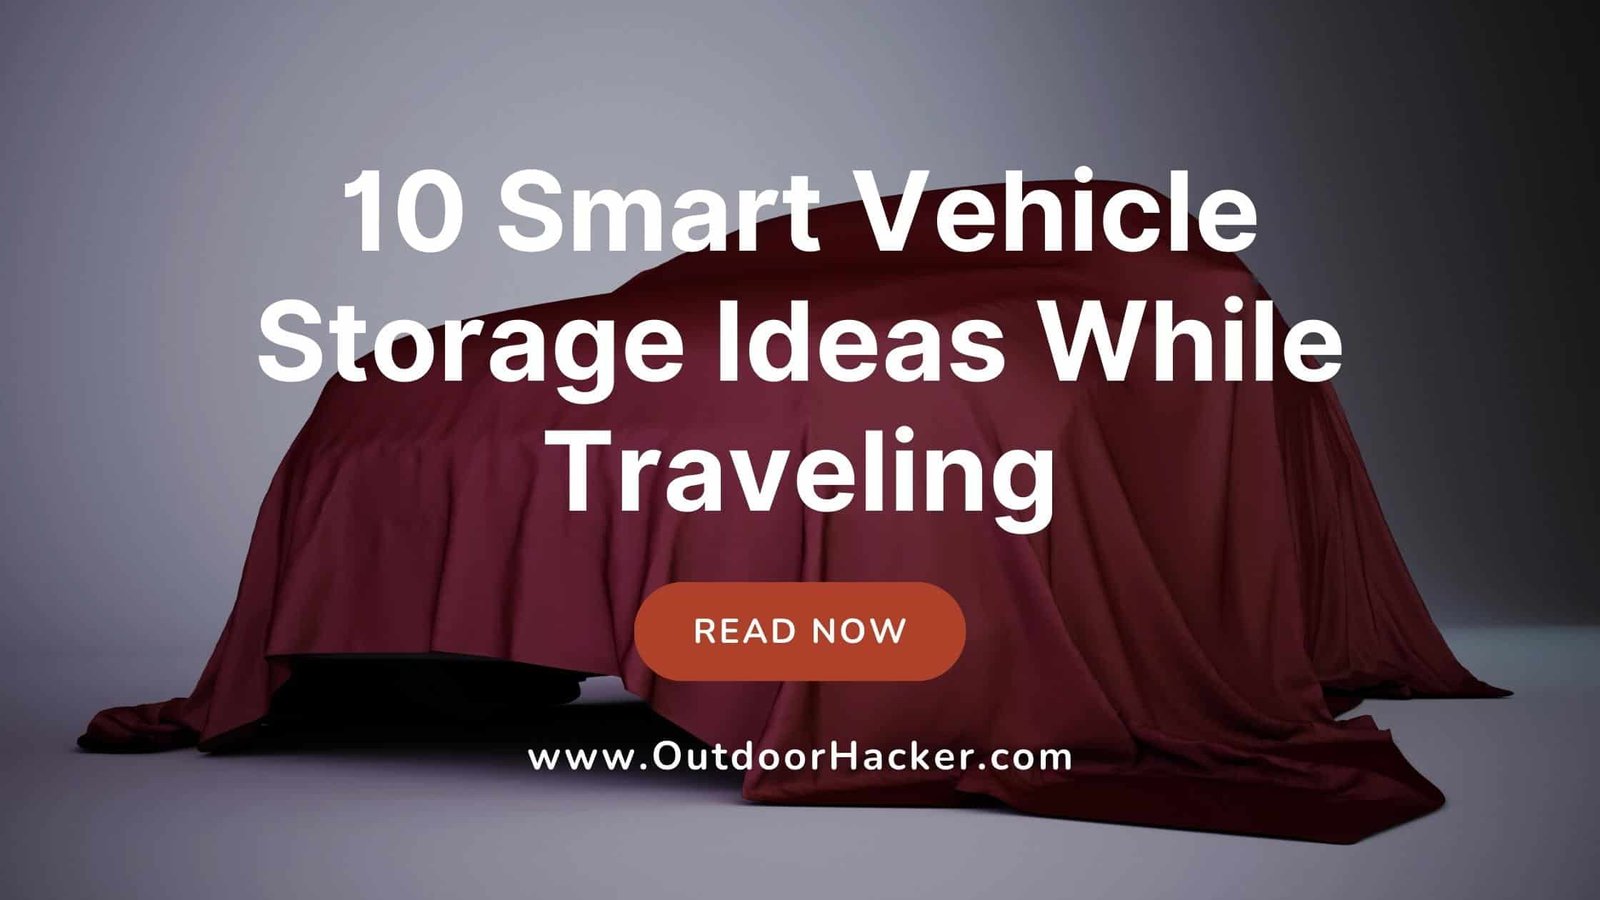 Ways to Safely Store Your Vehicle While Traveling